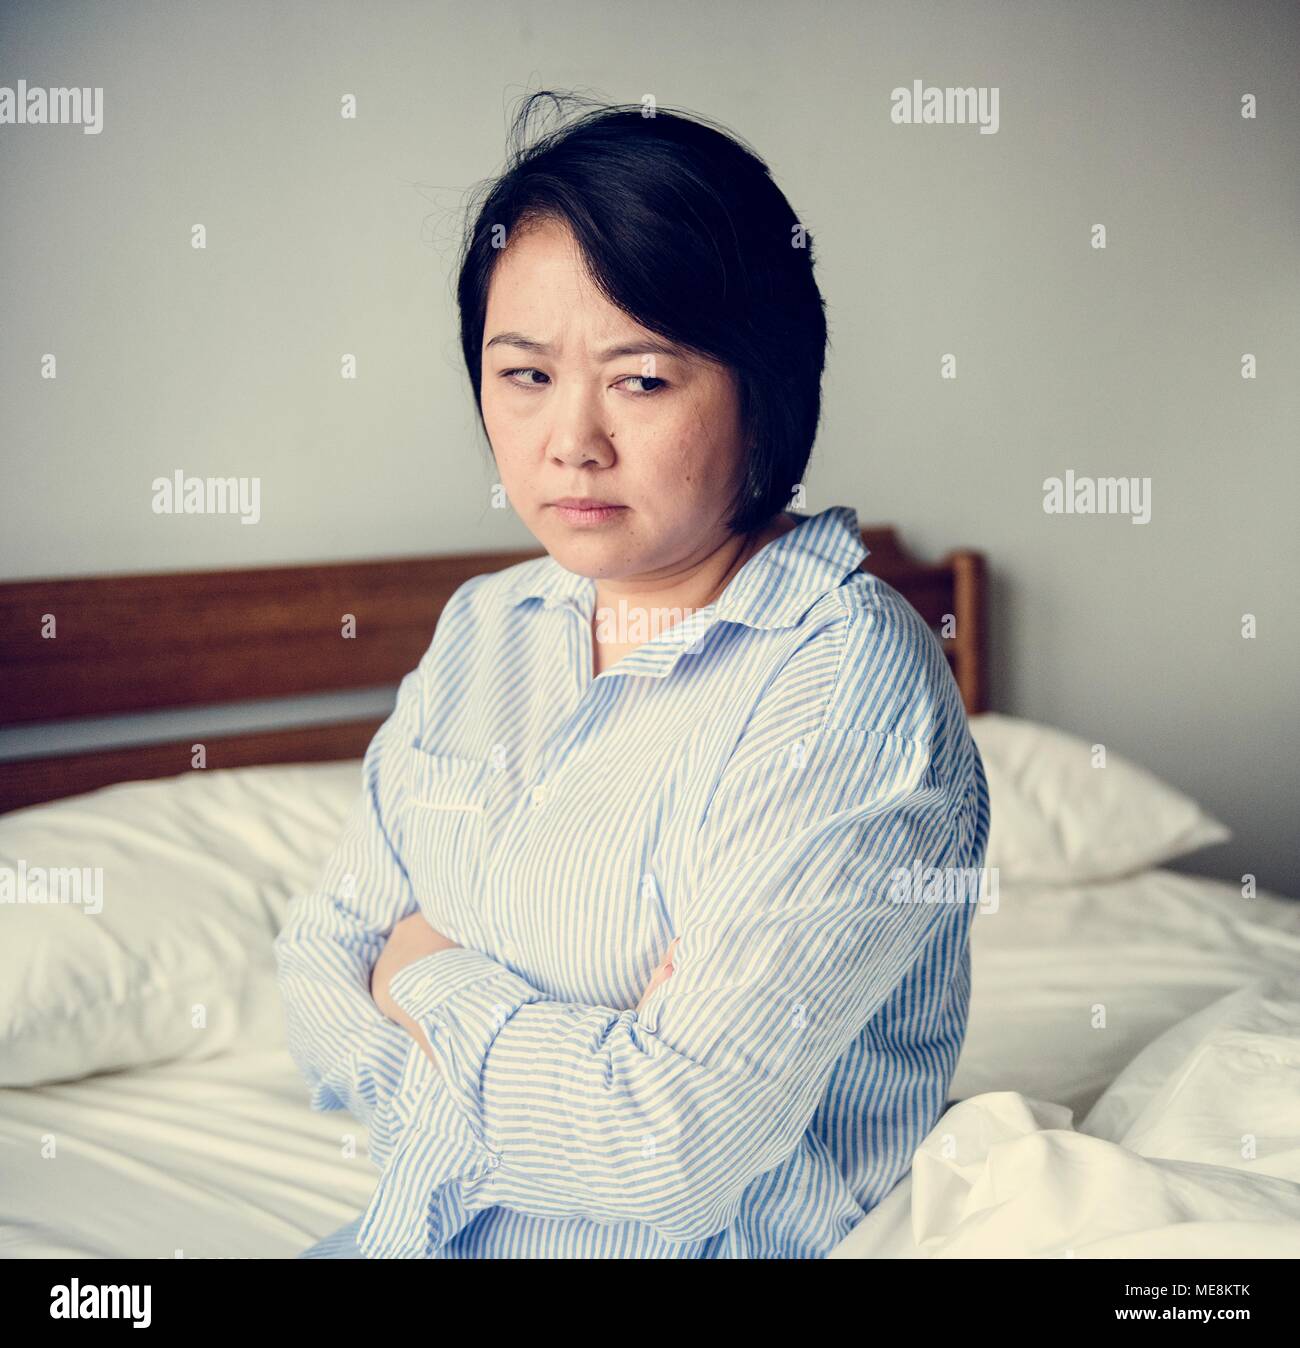 An upset woman in a bed room Stock Photo